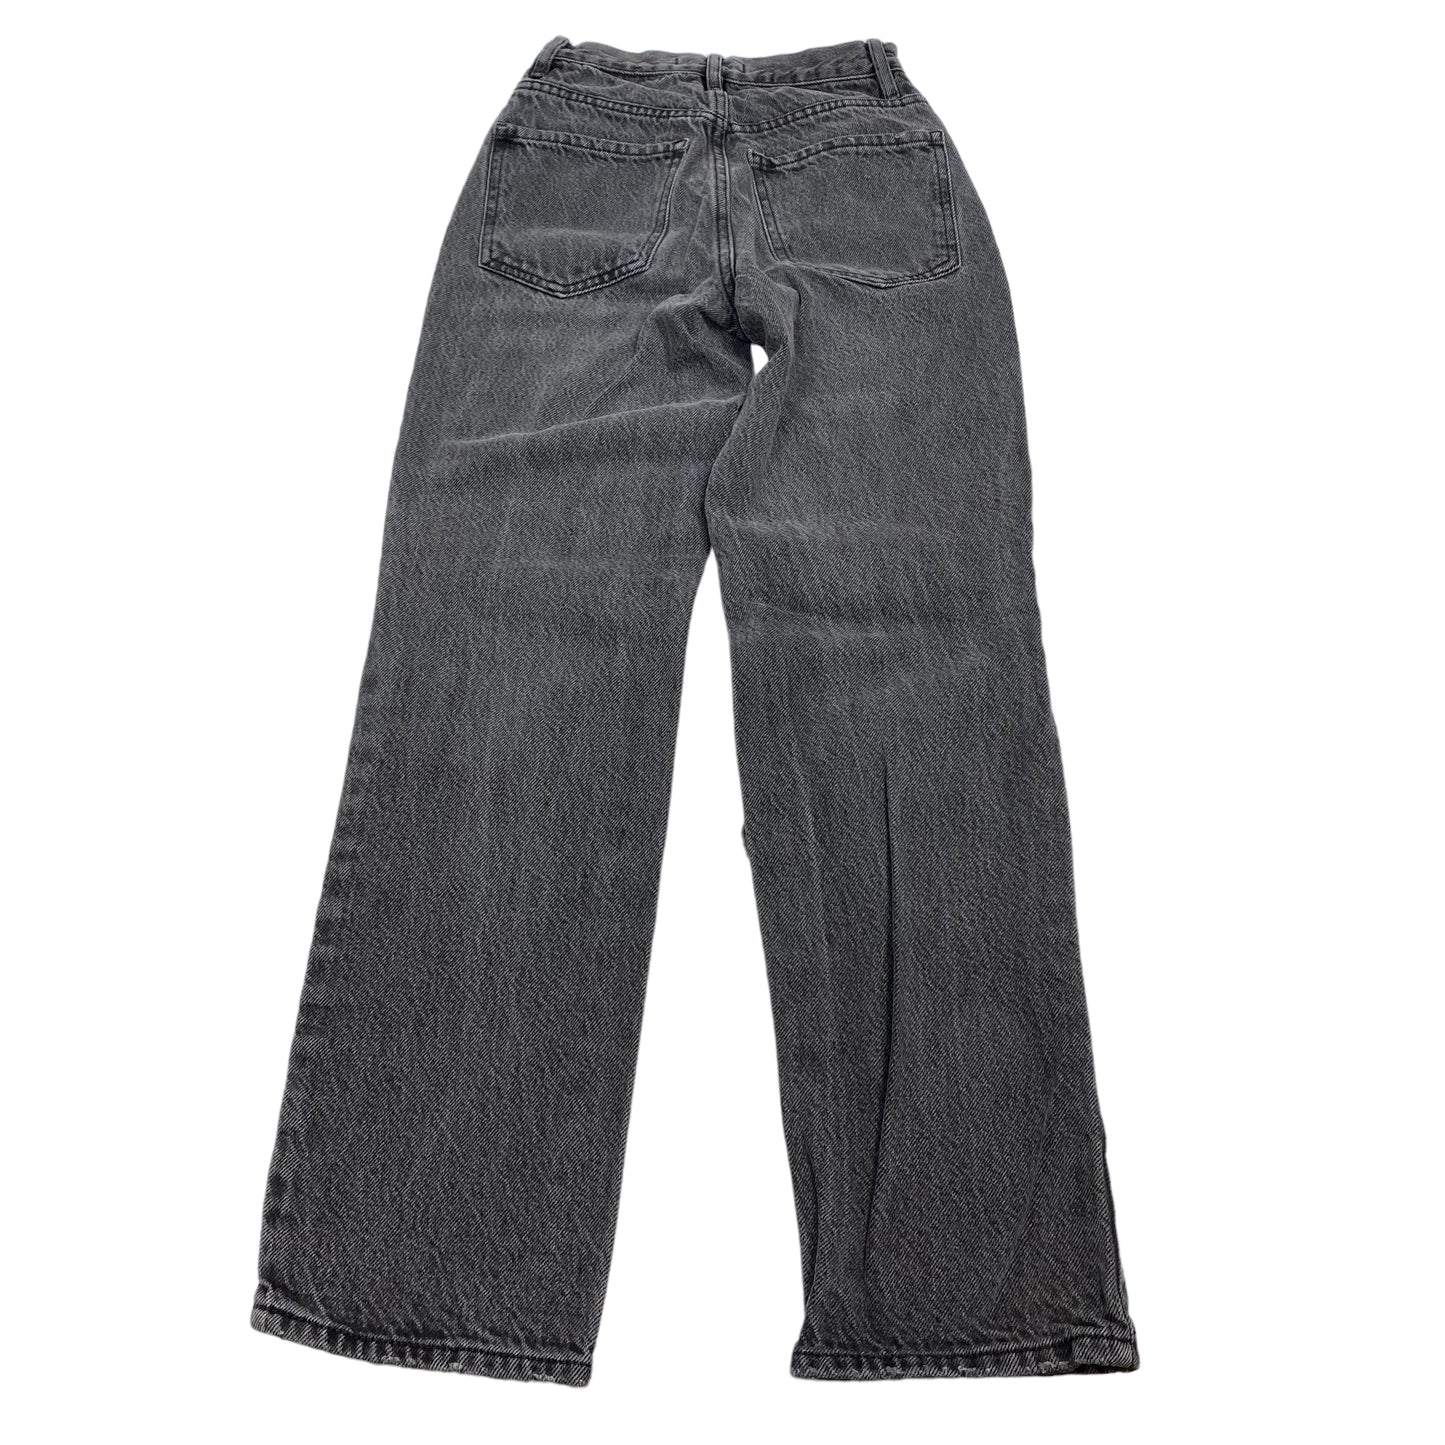 Jeans Relaxed/boyfriend By Pacsun  Size: 0